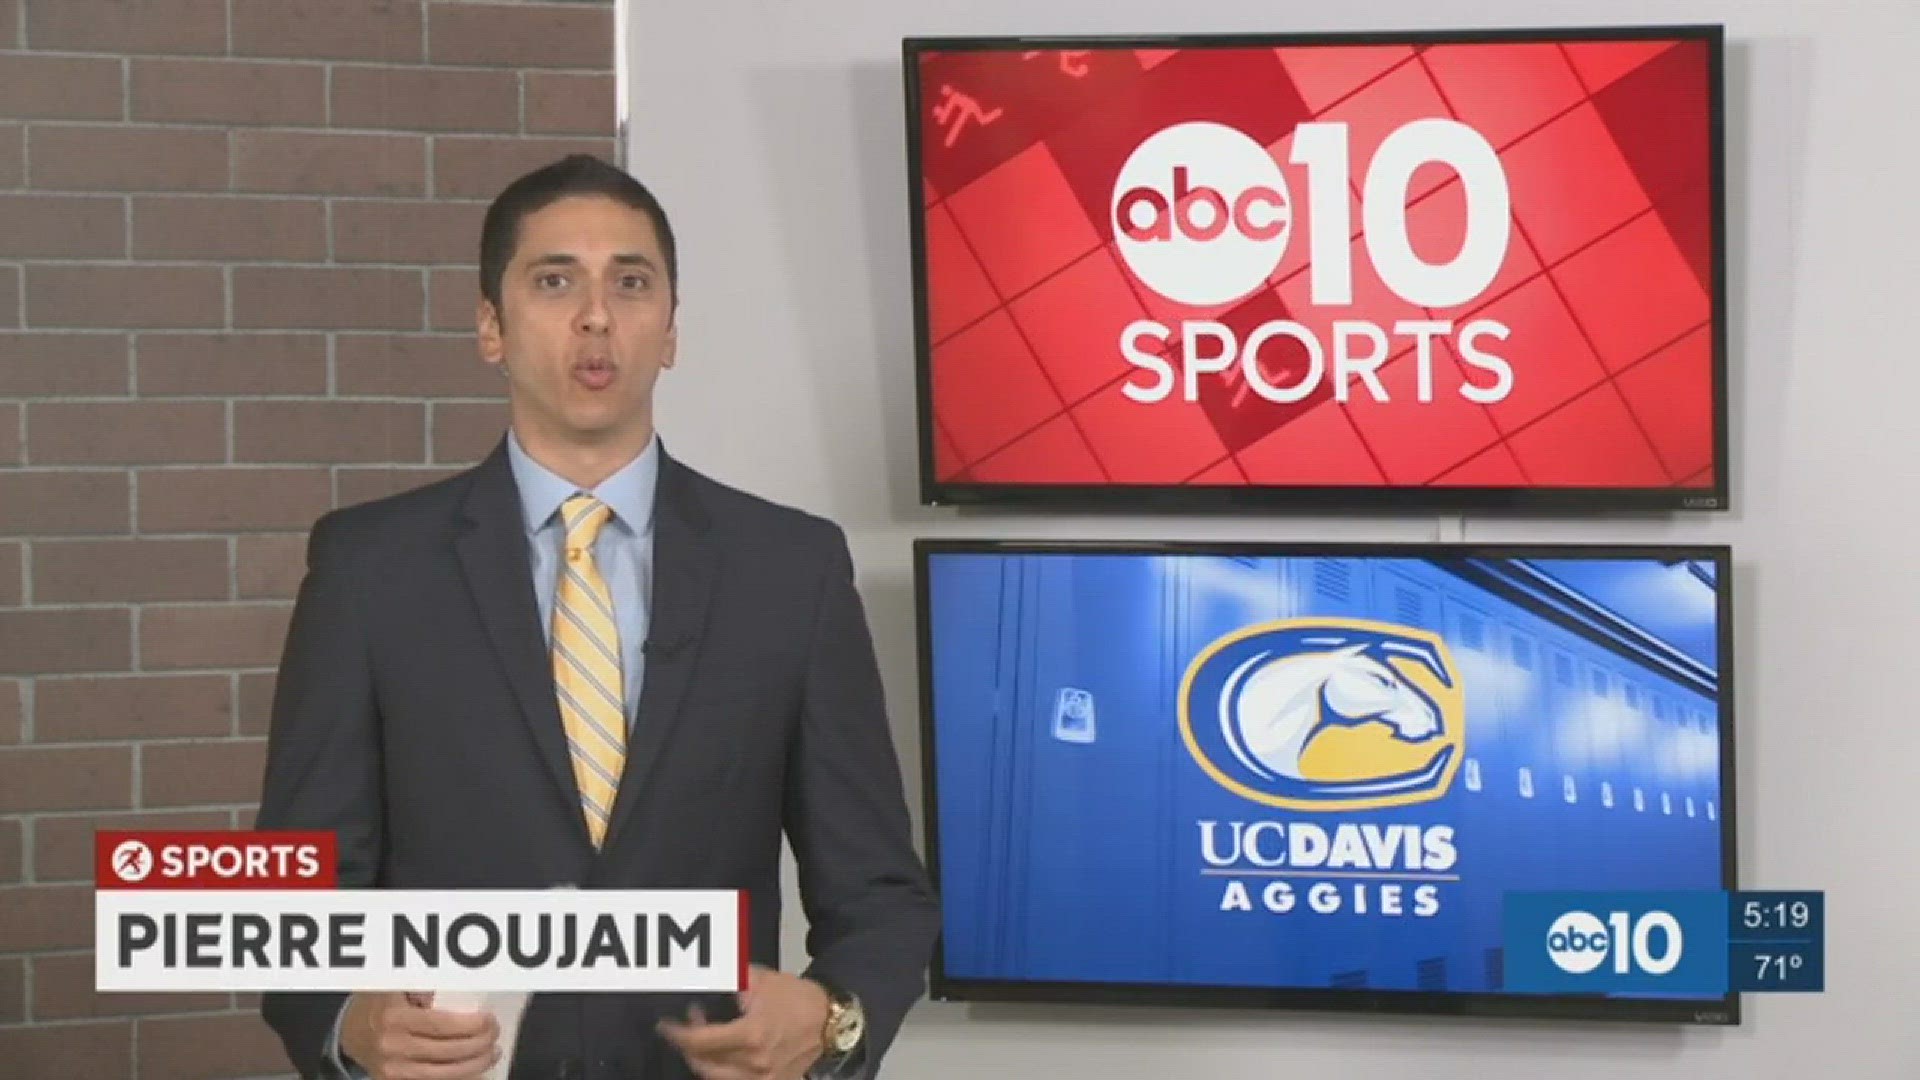 The UC Davis Aggies are off to a 2-1 start on the young football season. Weber State awaits UCD this Saturday. If the Aggies win, they'll record their first three game winning streak since joining the Big Sky Conference in 2012